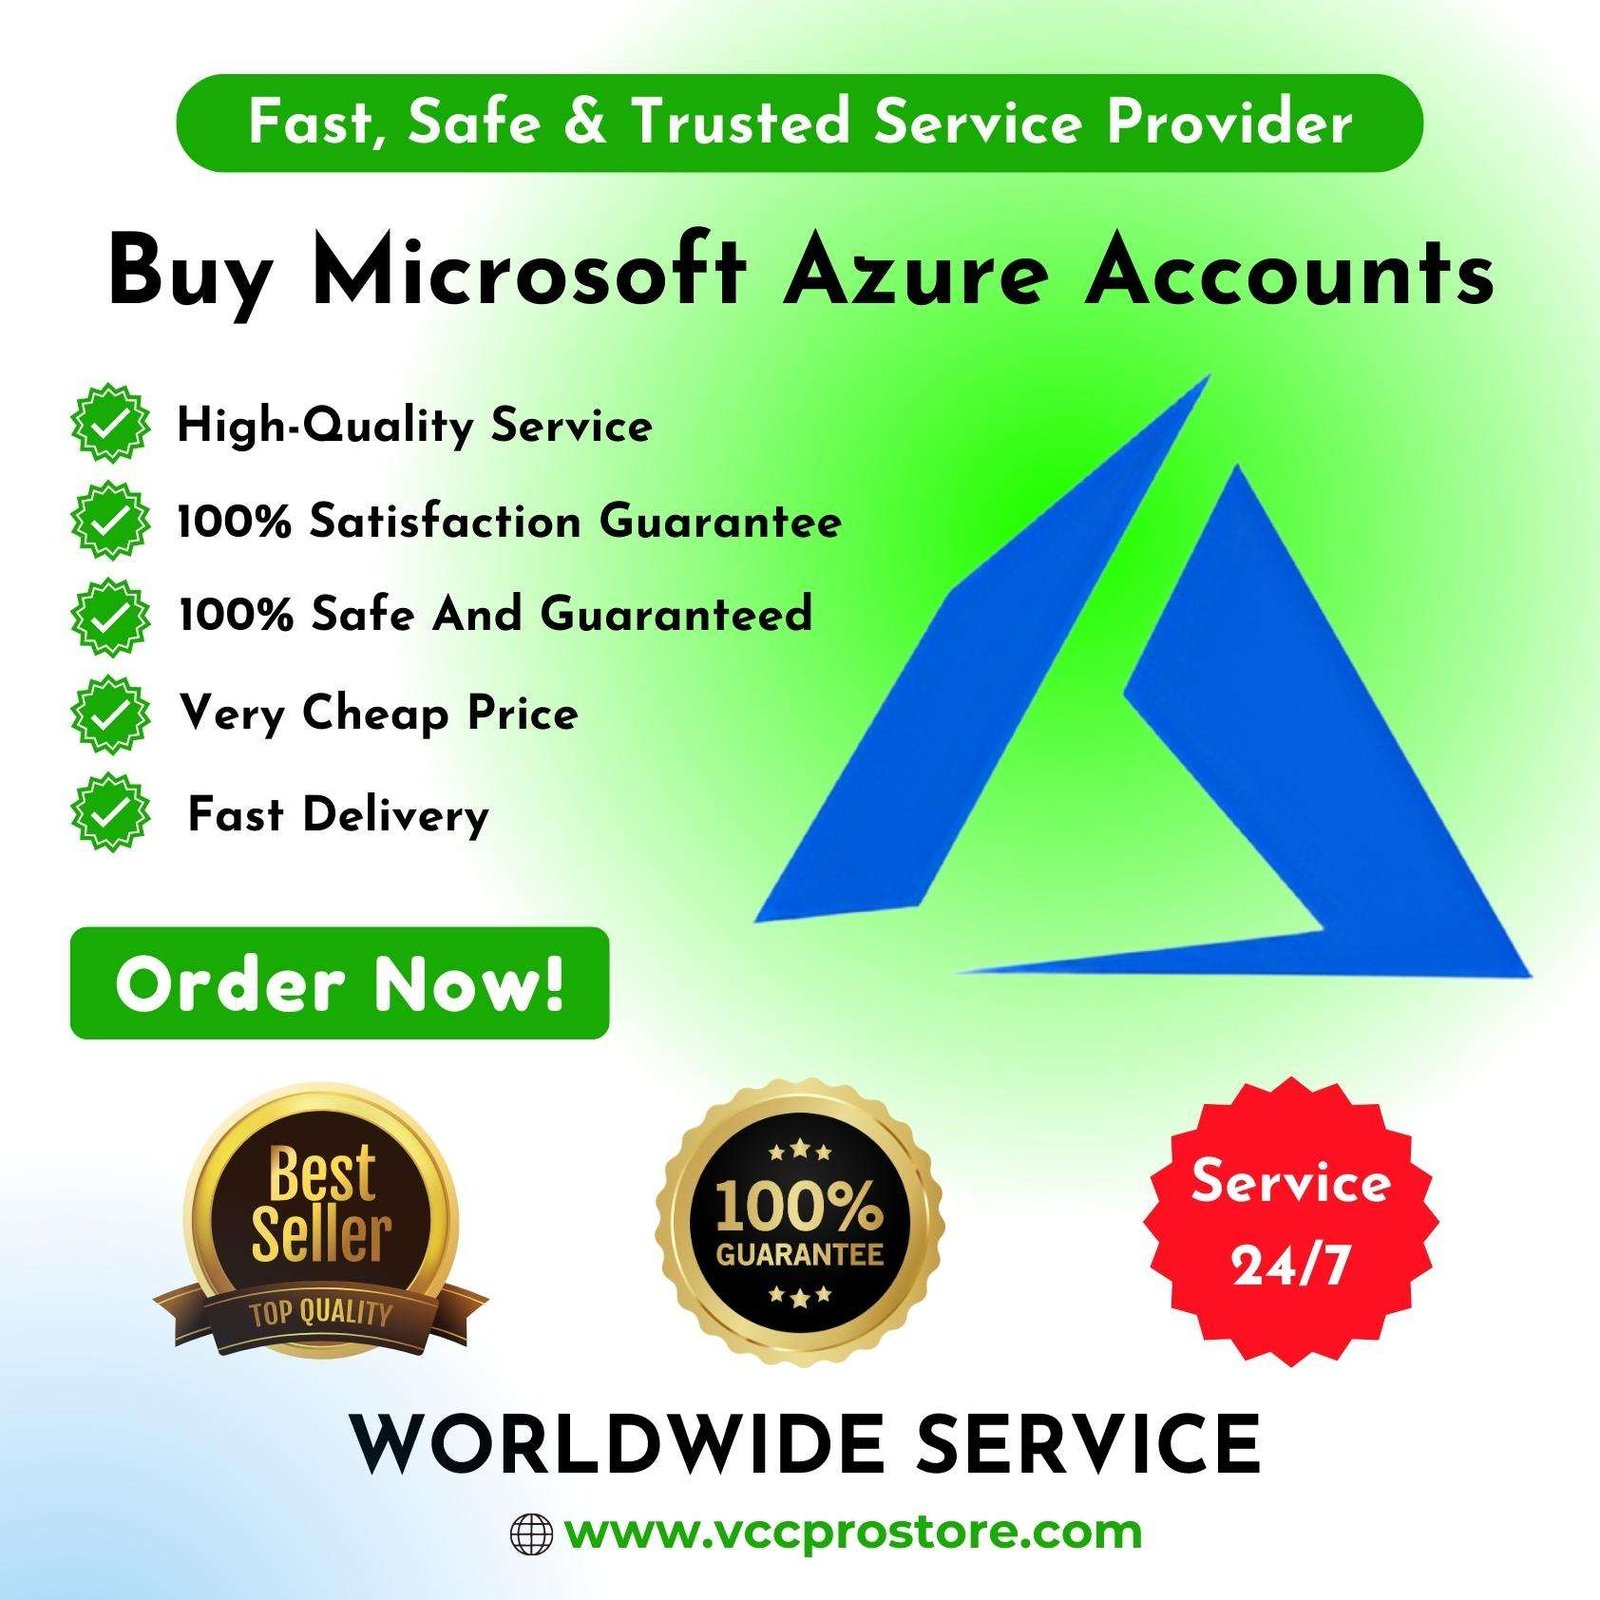 Buy Microsoft Azure Account - Get Free Trail & Pay as you go